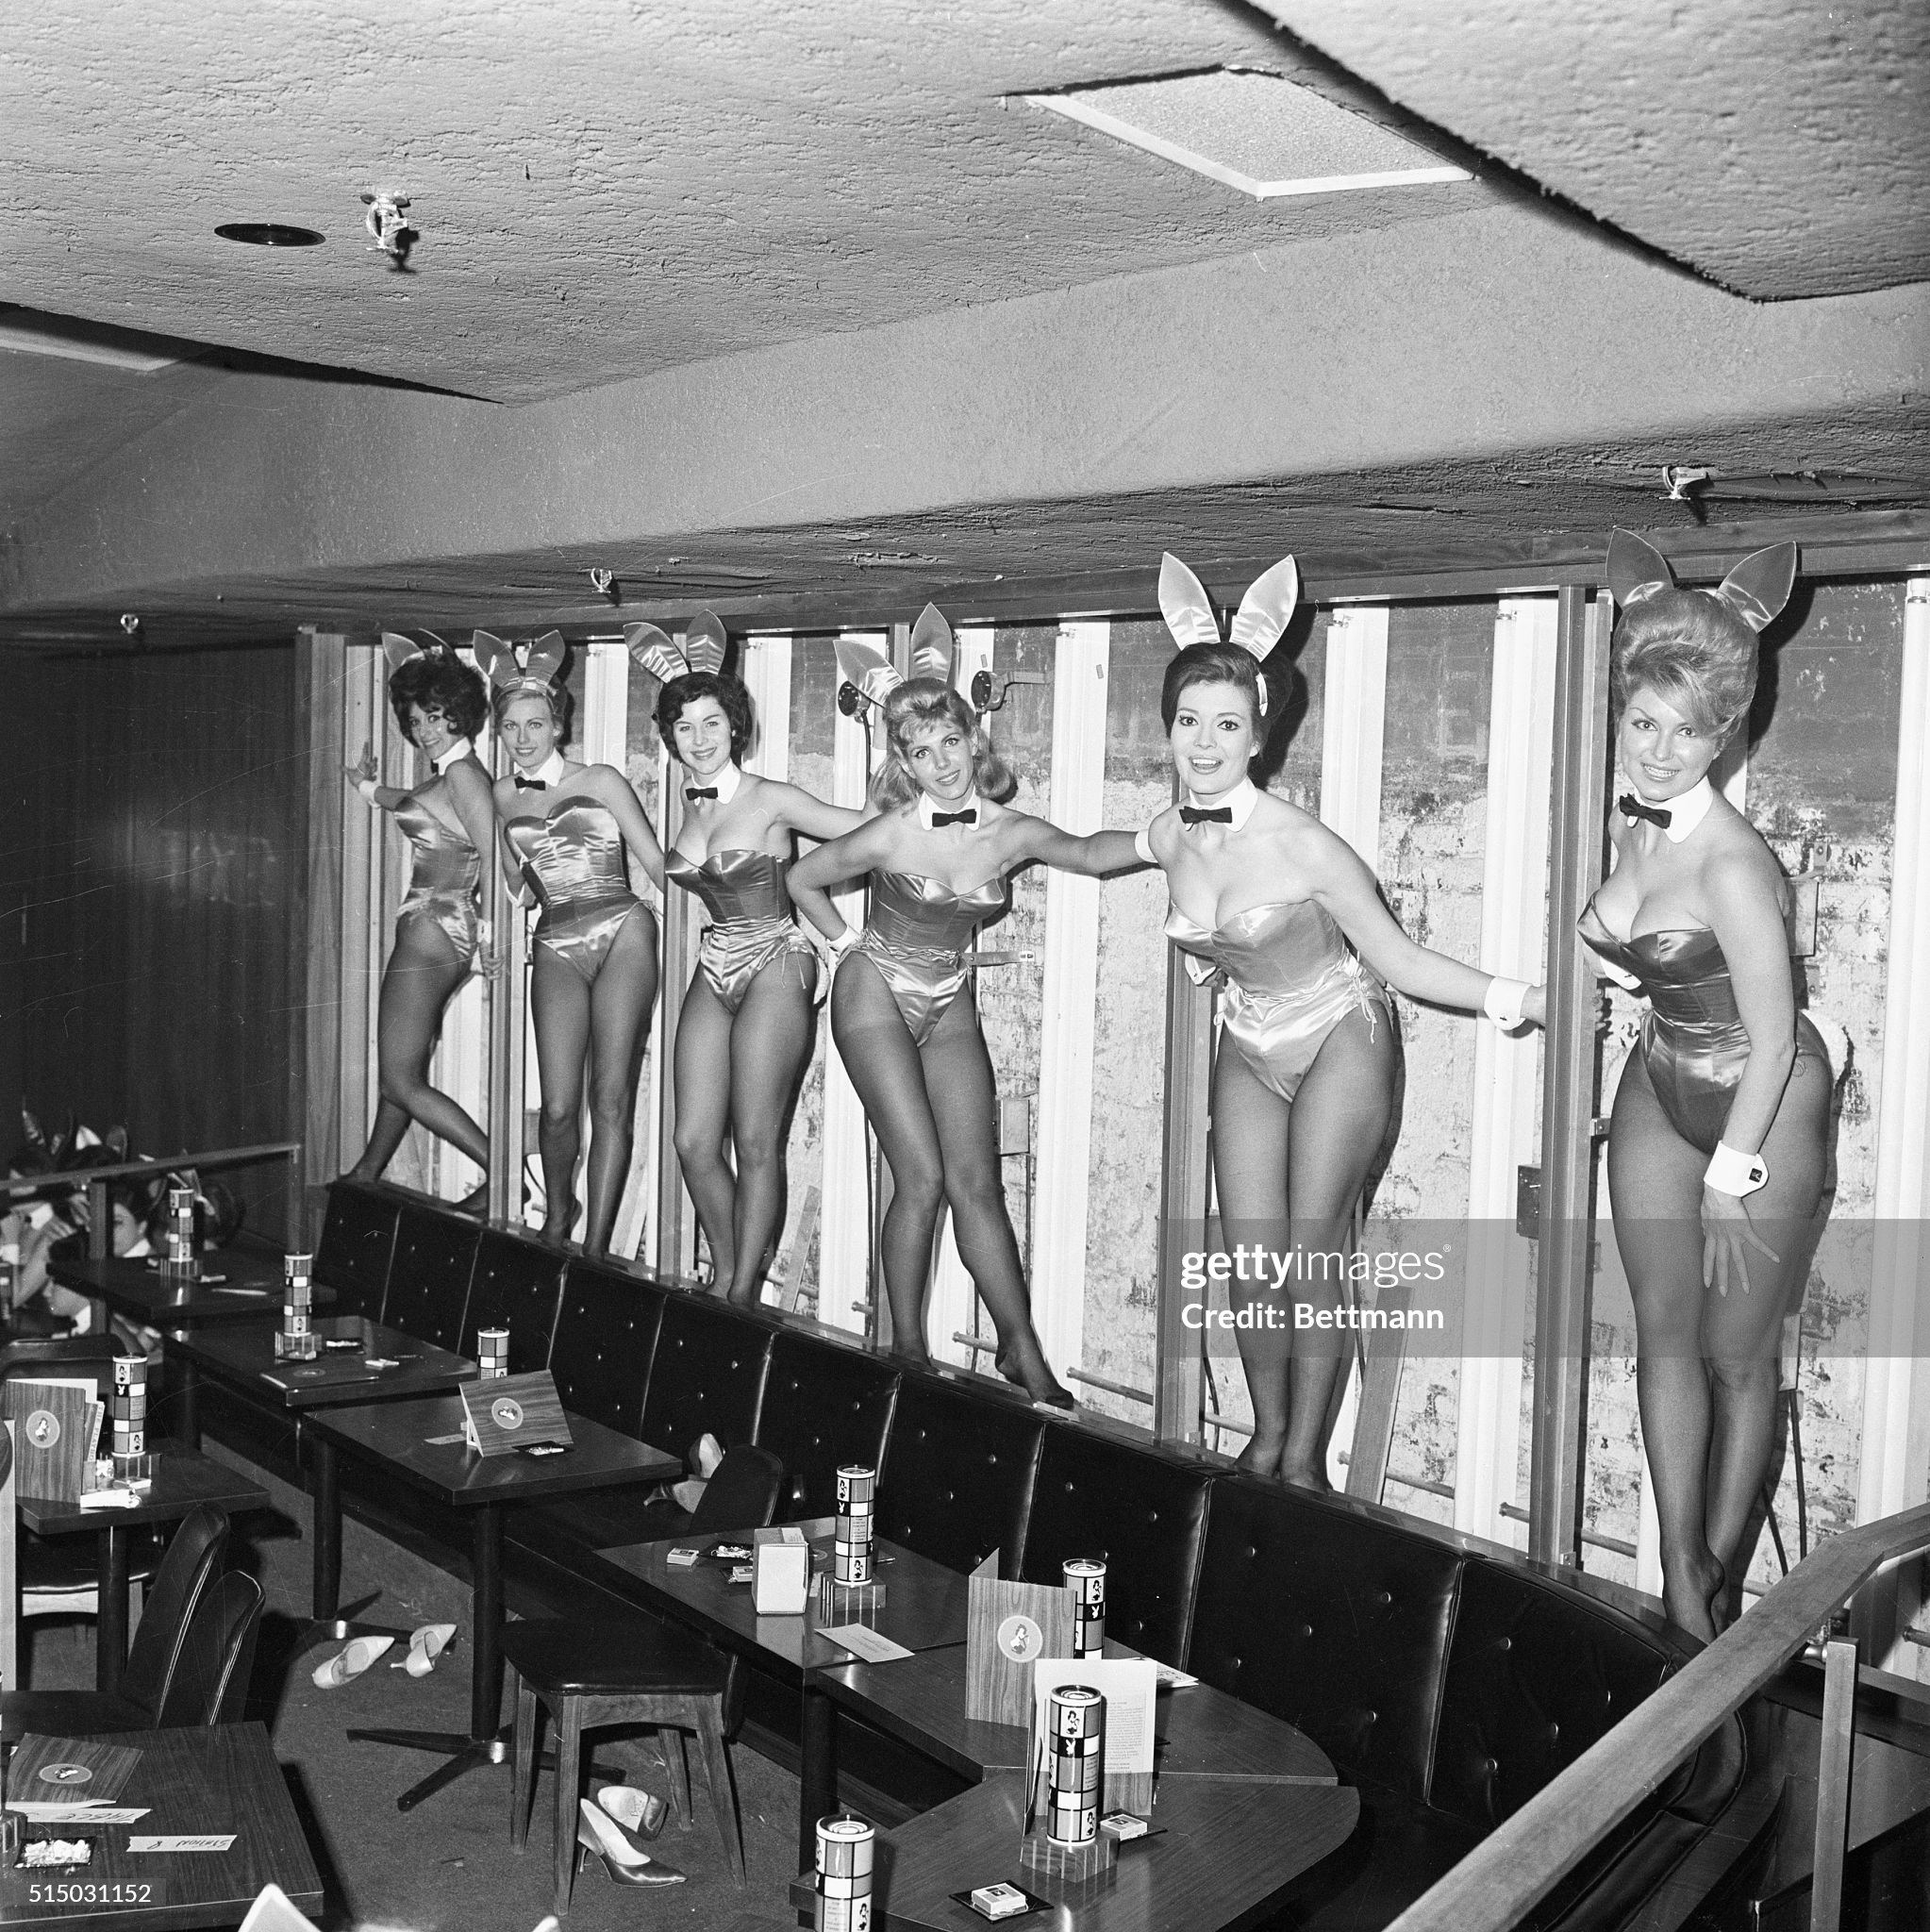 December 01.1962. Decorating the still furnished wall of the new Playboy Club in New York City are the shapely hostesses. 